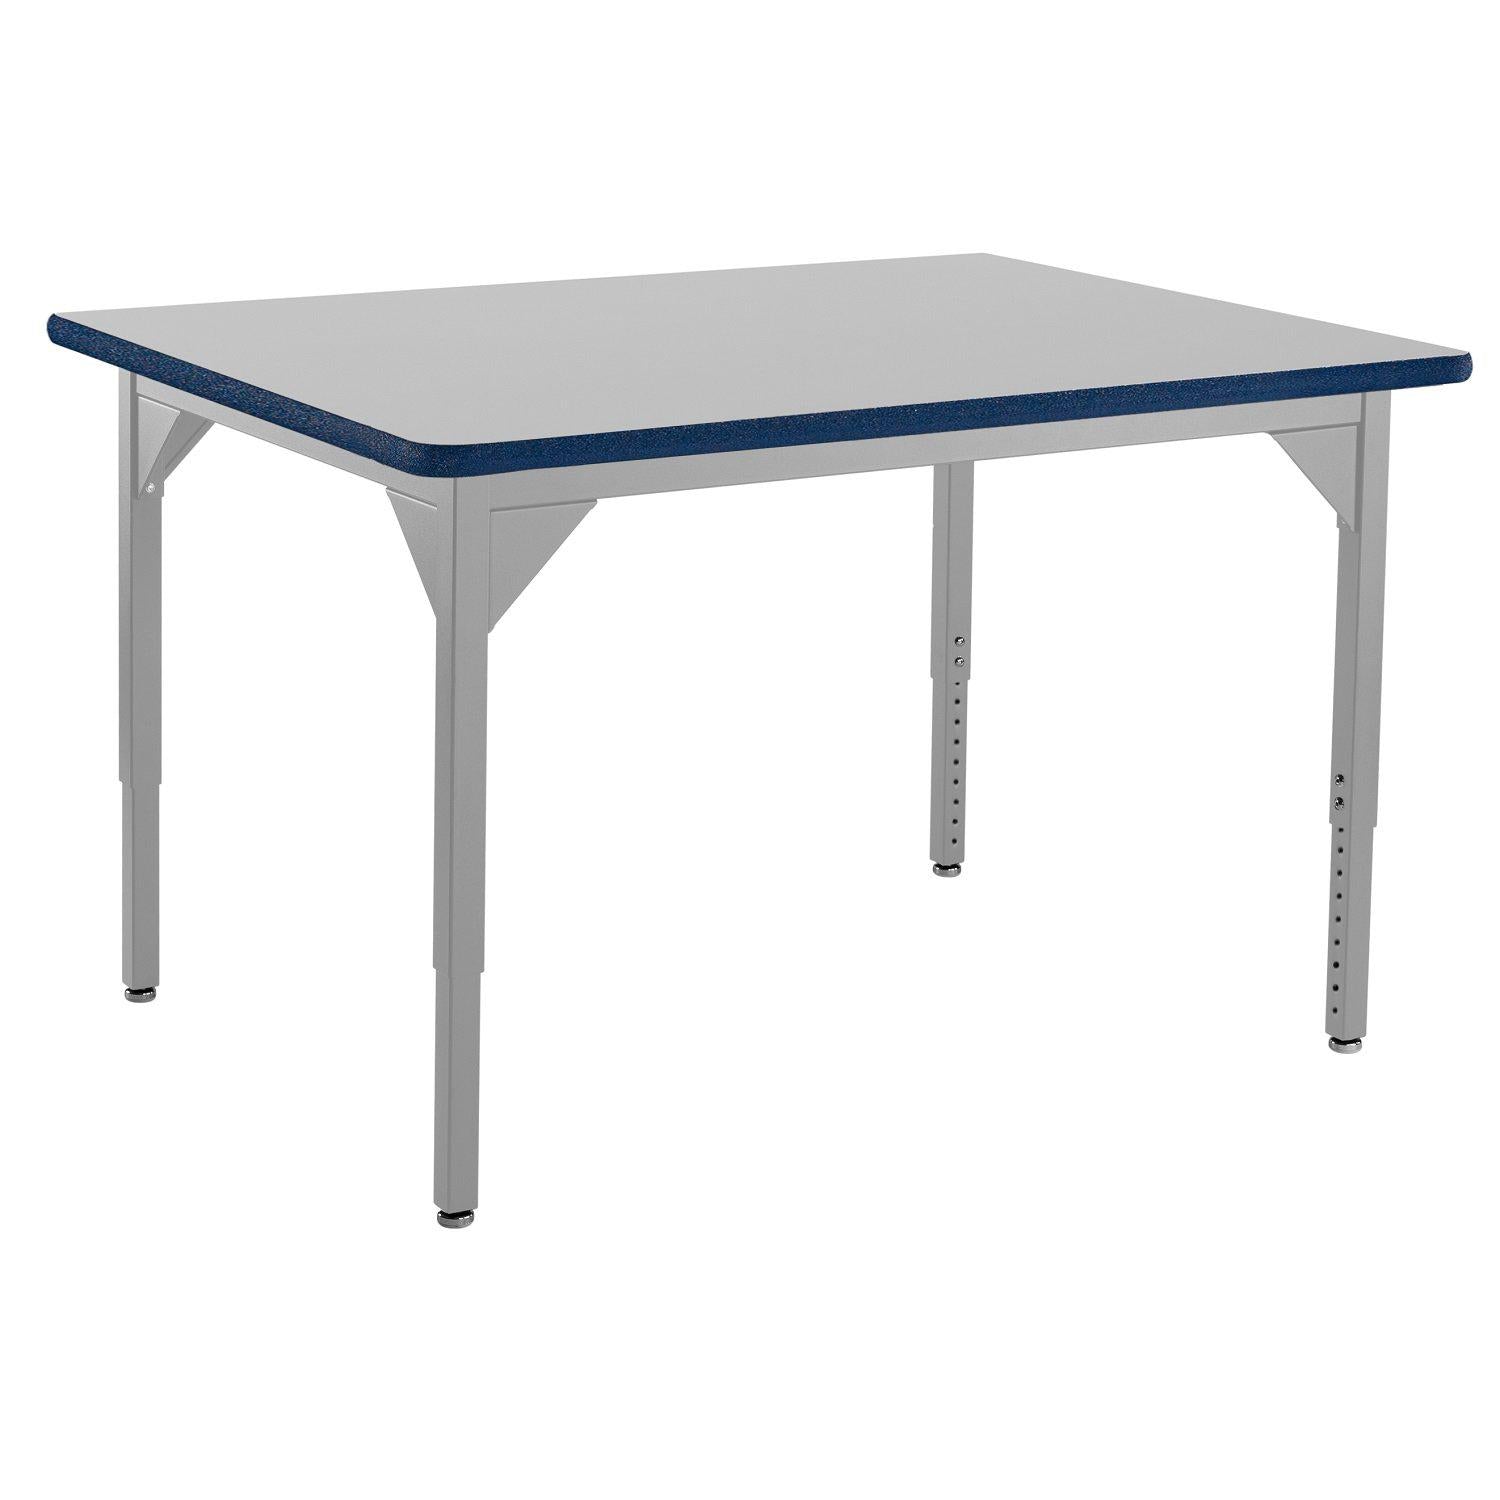 Heavy-Duty Height-Adjustable Utility Table, Soft Grey Frame, 36" x 48", Supreme High-Pressure Laminate Top with Black ProtectEdge